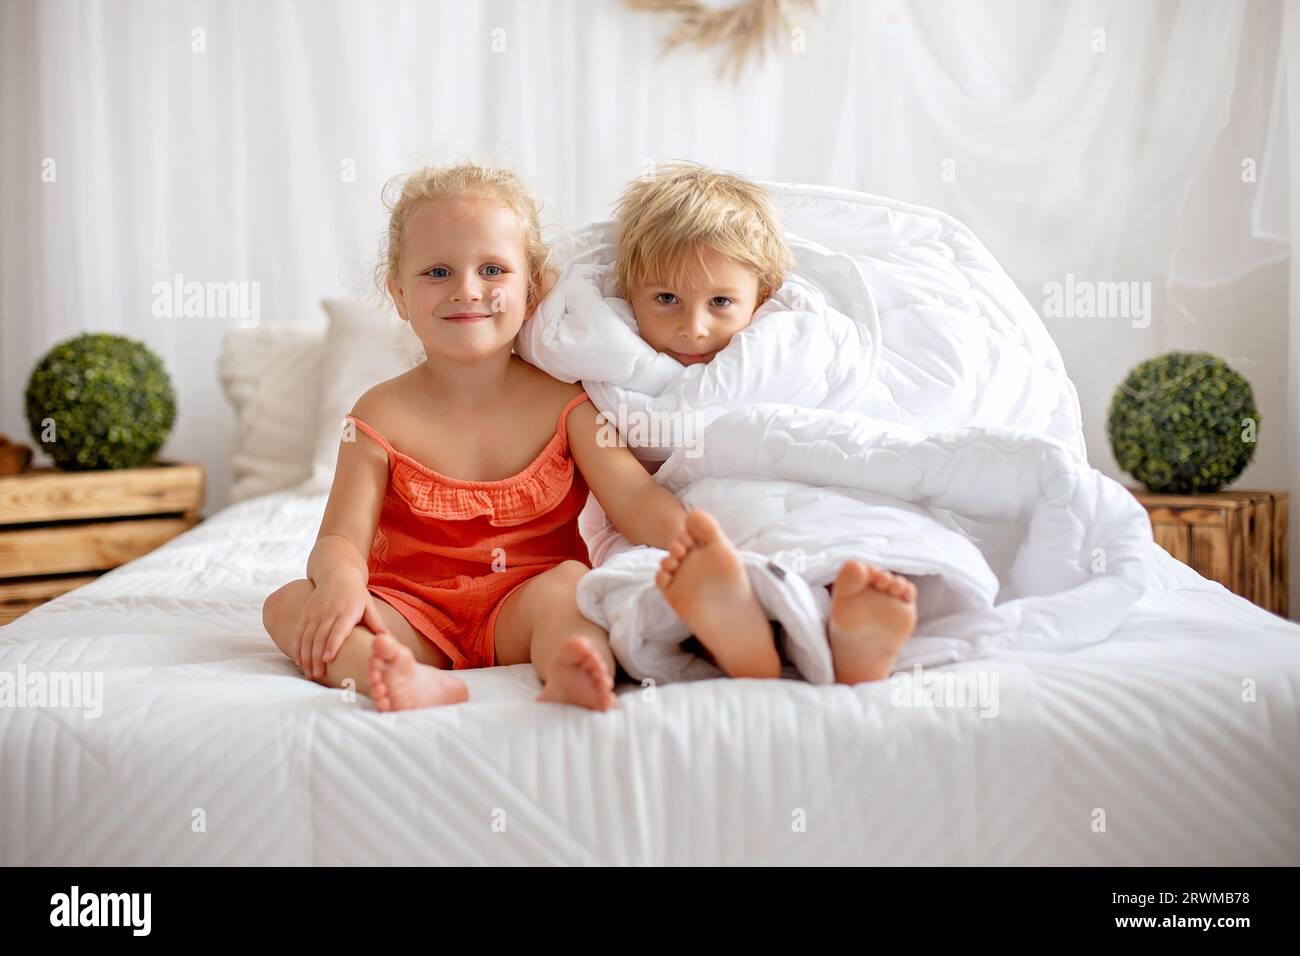 Happy positive children, tickling on the feet, having fun together, boy and girl at home having wonderful day of joy together Stock Photo